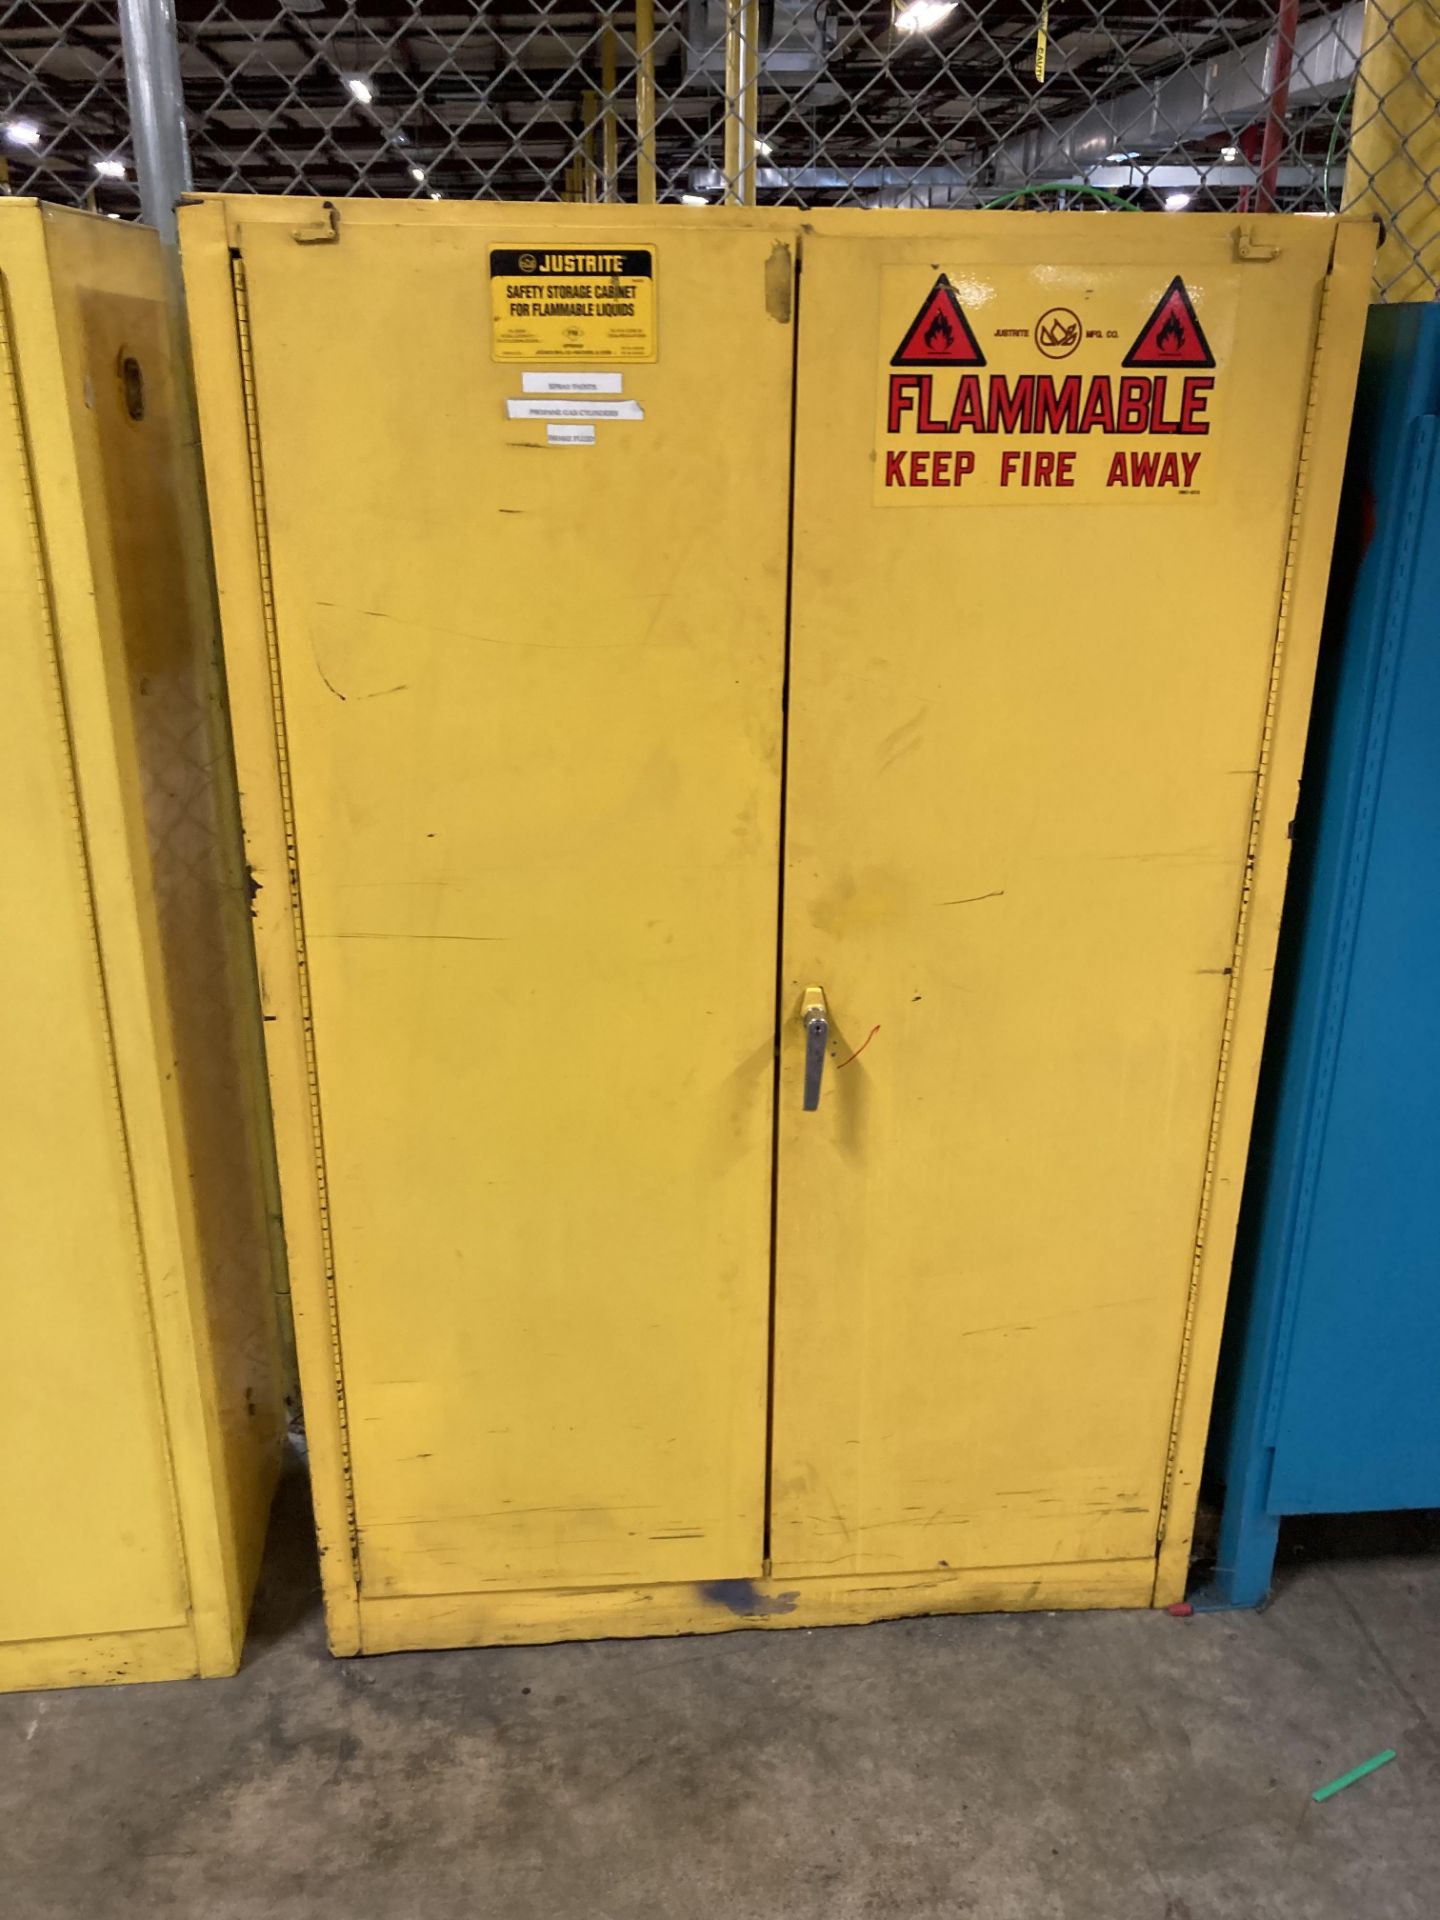 Justrite 45Gal Flammable Liquid Storage Cabinet - Image 2 of 4